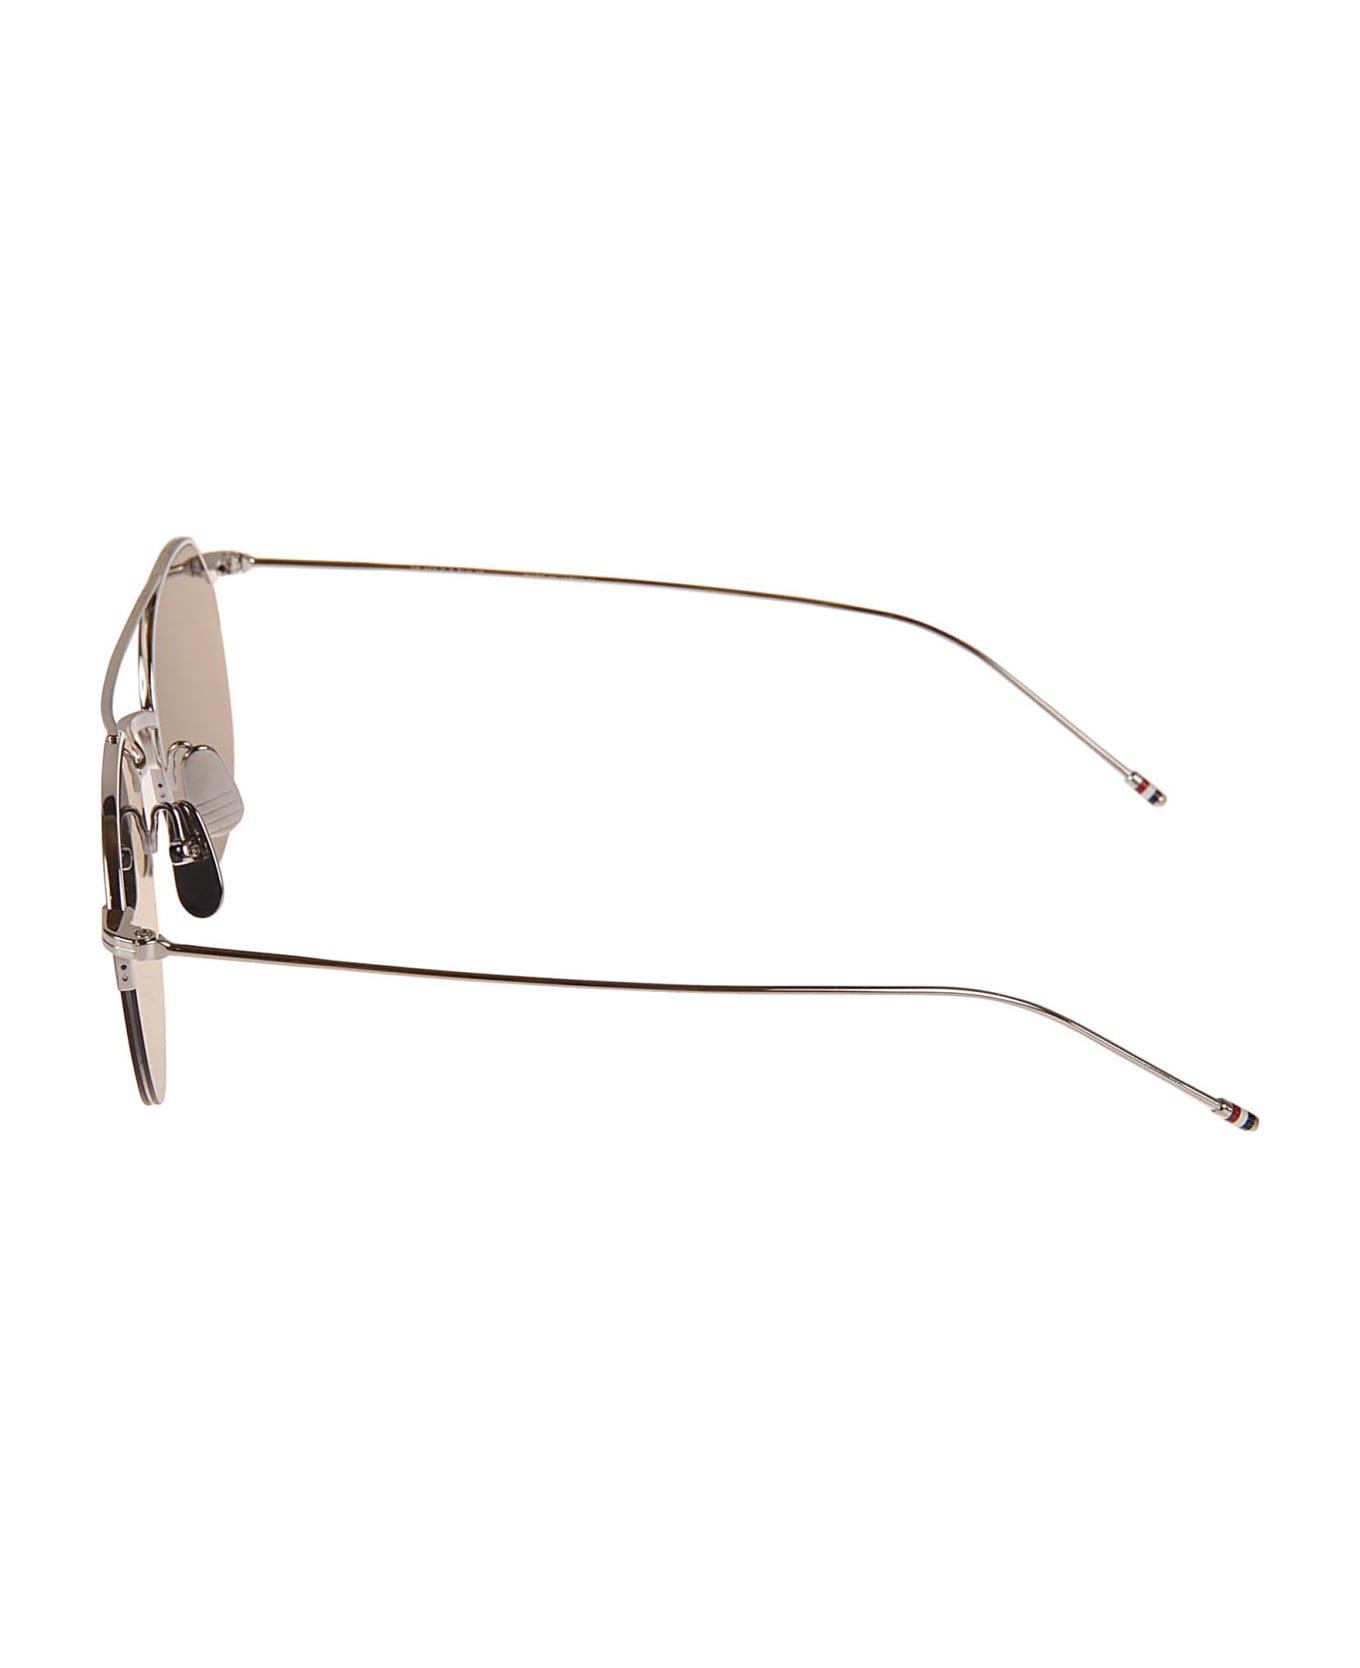 Thom Browne Round Frame W/ Top Bar Sunglasses - Silver サングラス